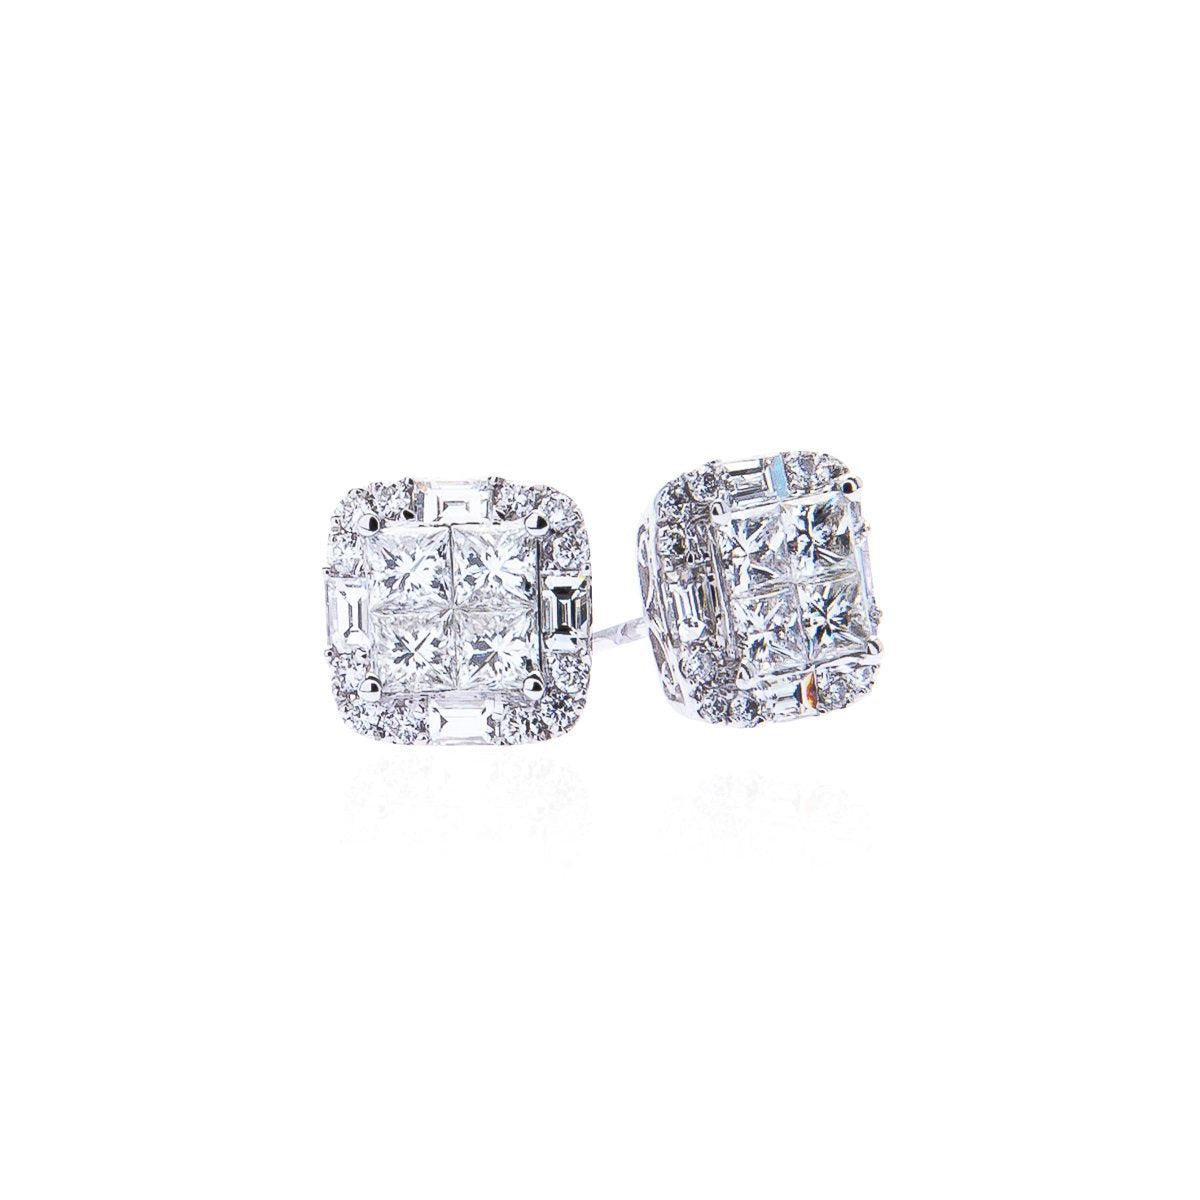 Sabel Collection 14K White Gold Round, Baguette, and Princess Cut Diamond Stud Earrings